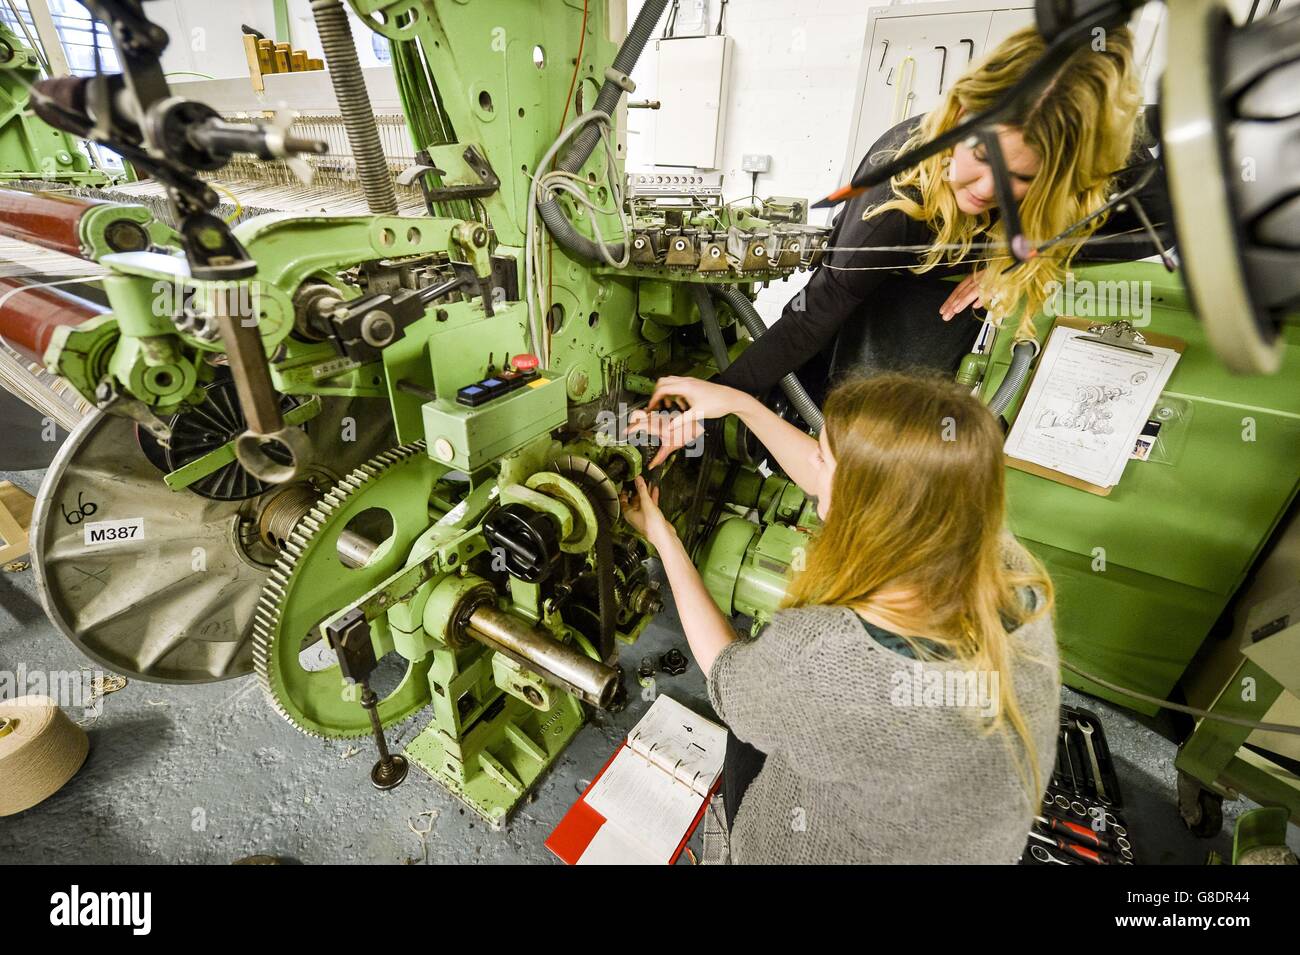 Director of Design and Production Laylah Cook ,24, top, assists Director Juliet Bailey, 33, as she changes a cog on a 1980's loom, made by Dornier, the same company responsible for the World War II German Light Bomber, the Dornier Do 17, at The Bristol Weaving Mill, the first working cloth mill in Bristol in nearly 100 years - which is entirely run by women. Stock Photo